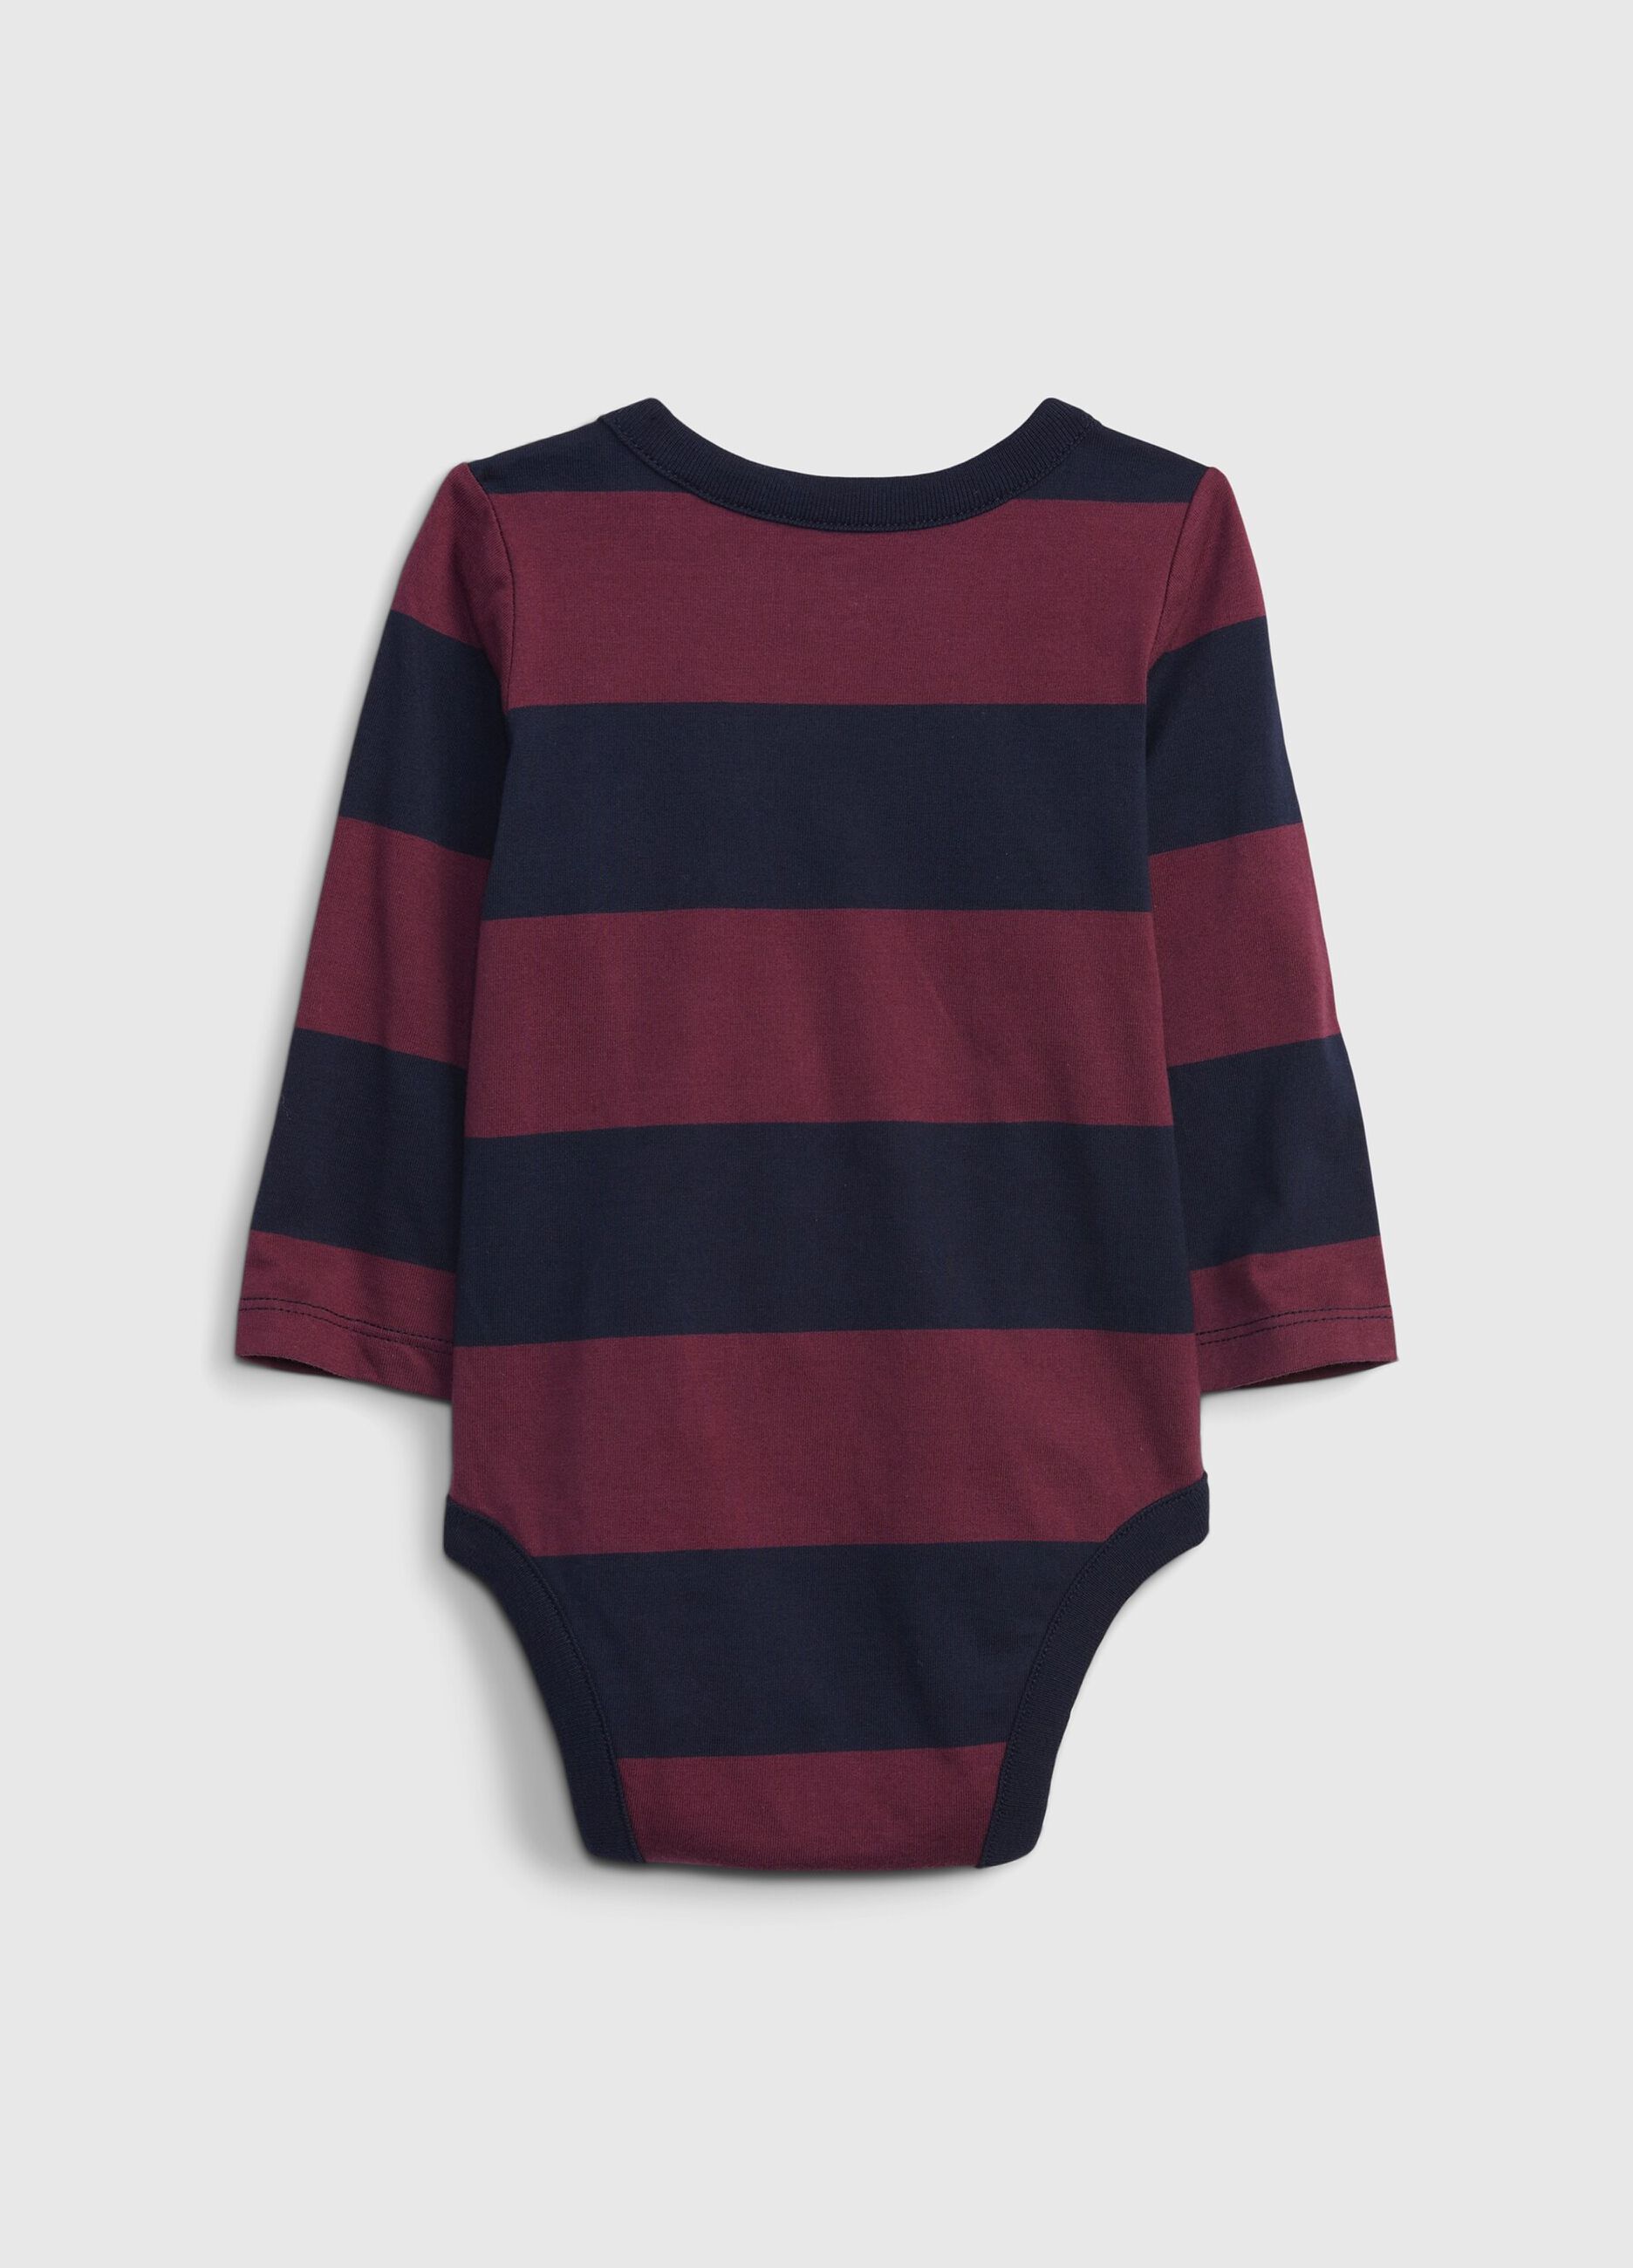 Striped bodysuit with teddy bear embroidery